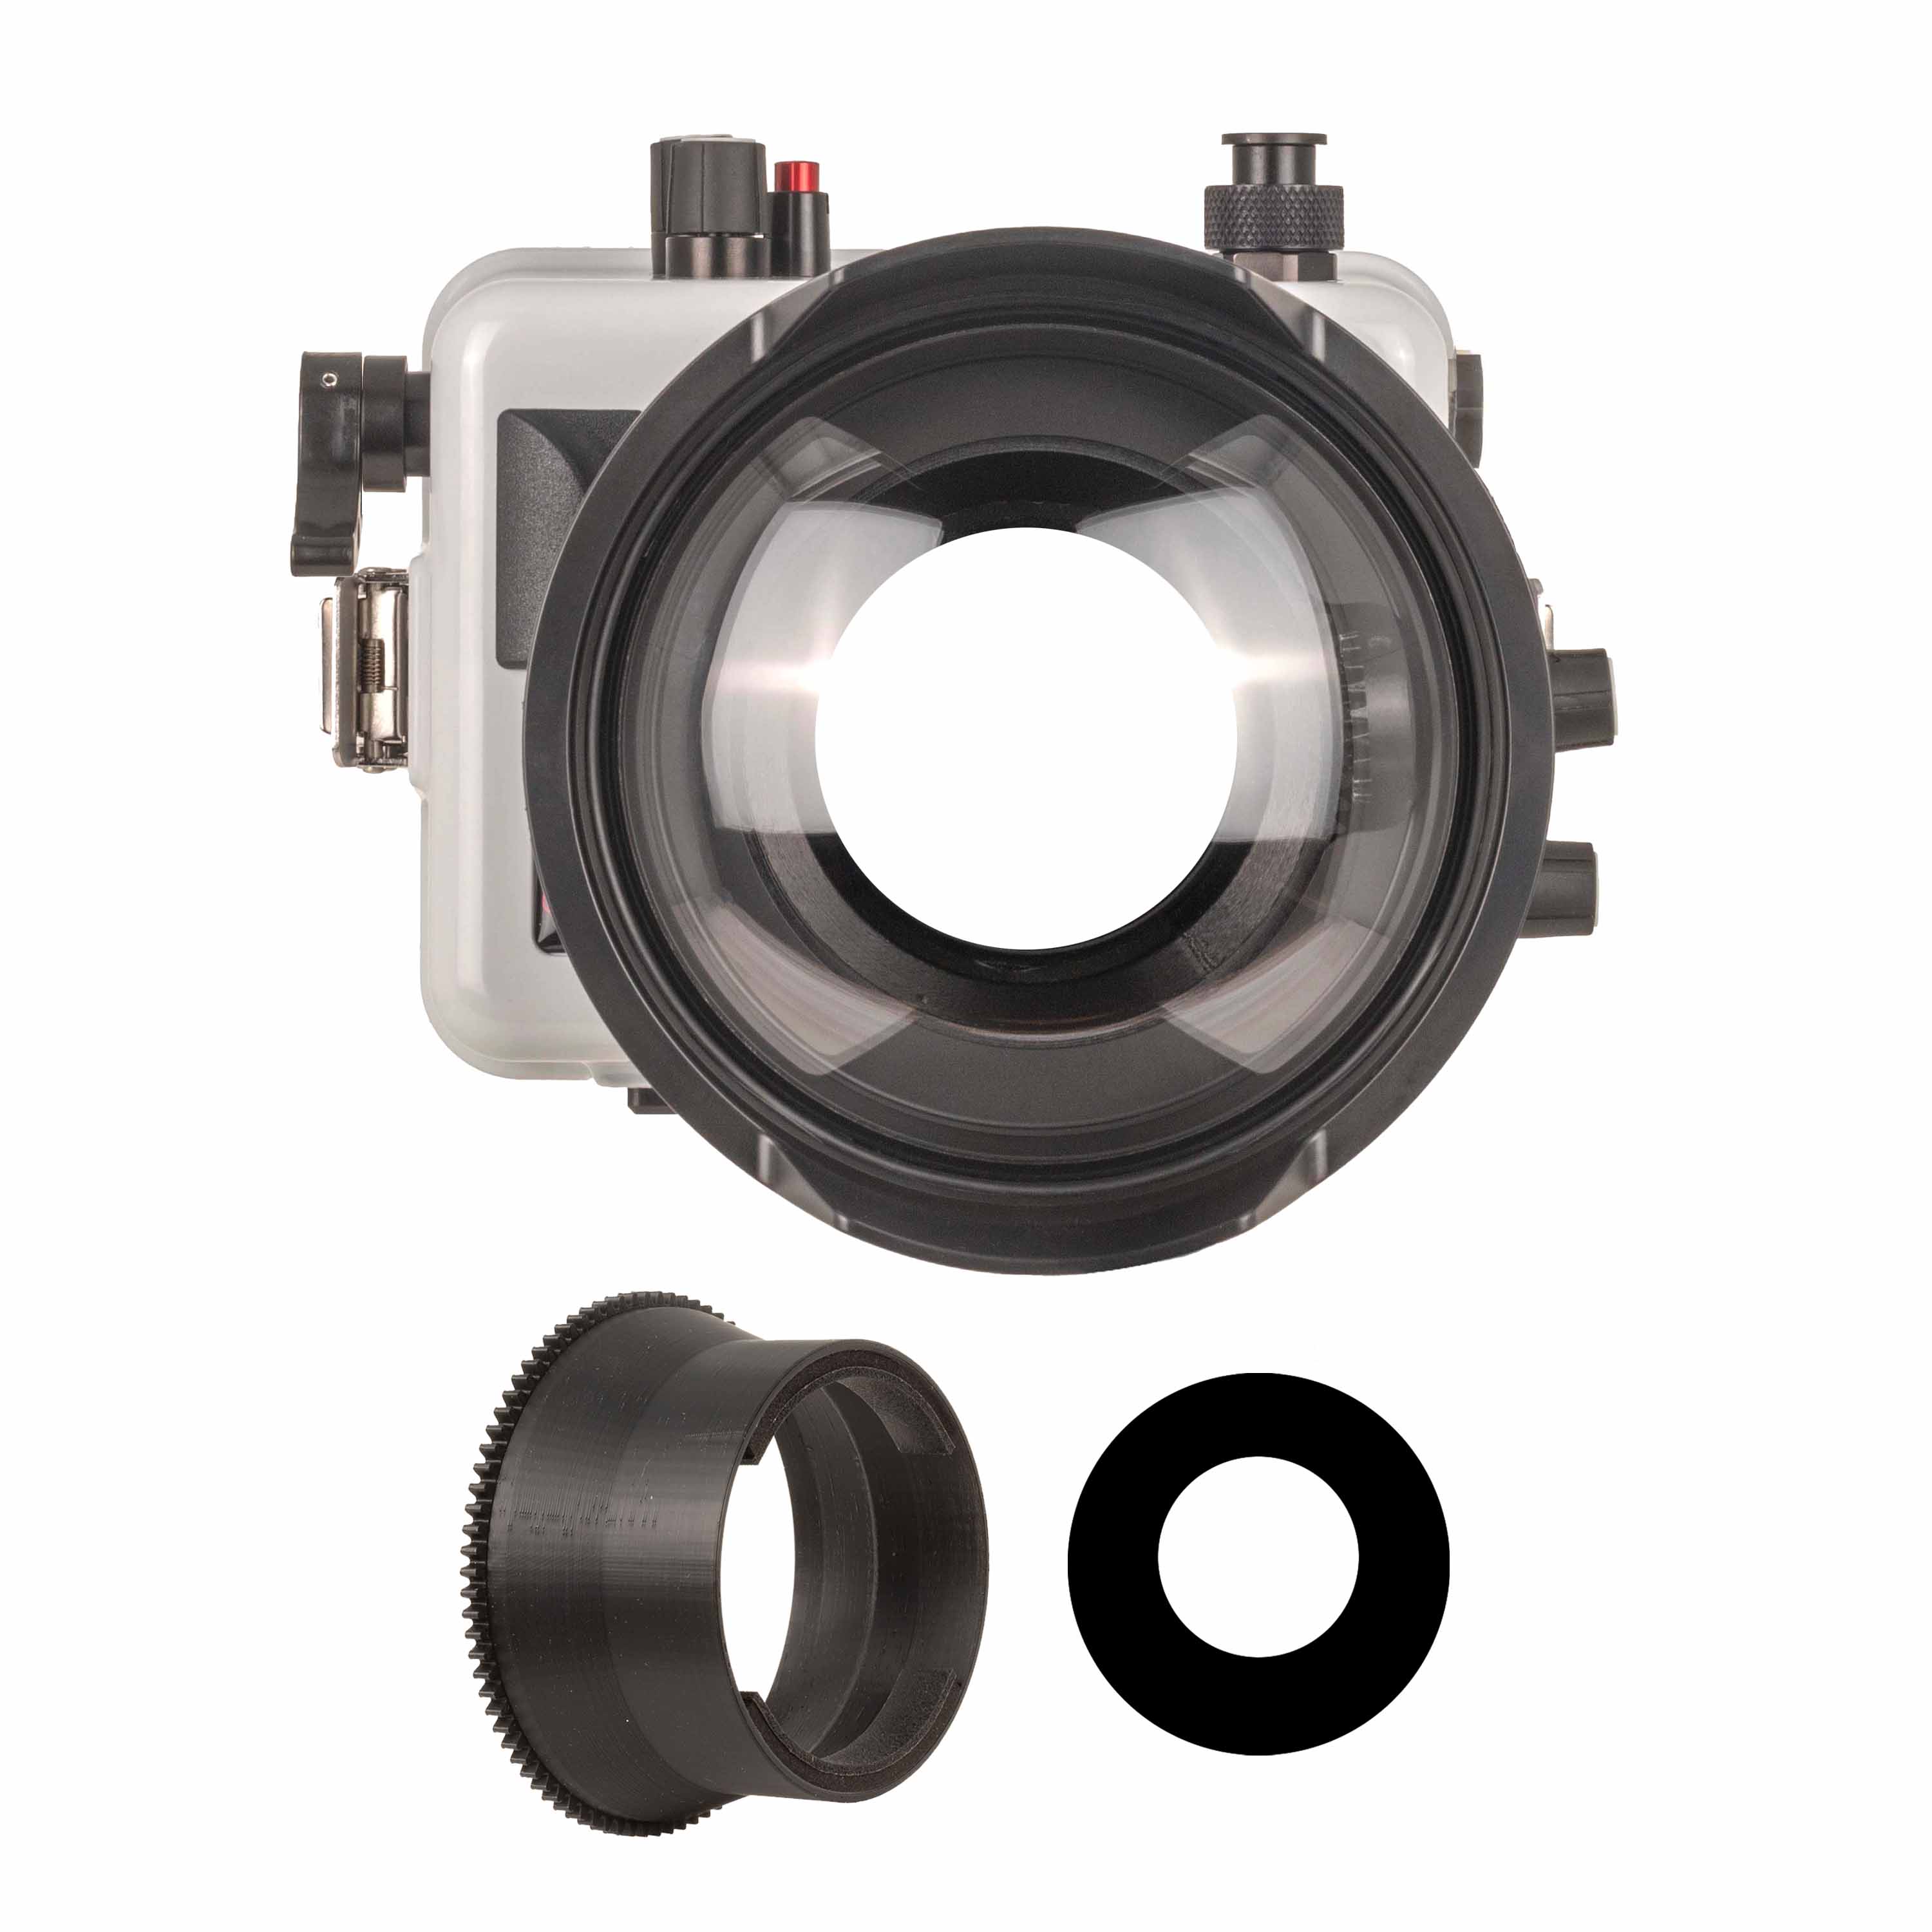 Ikelite 200DLM/D Underwater Housing for Canon EOS R100 with Dome Port